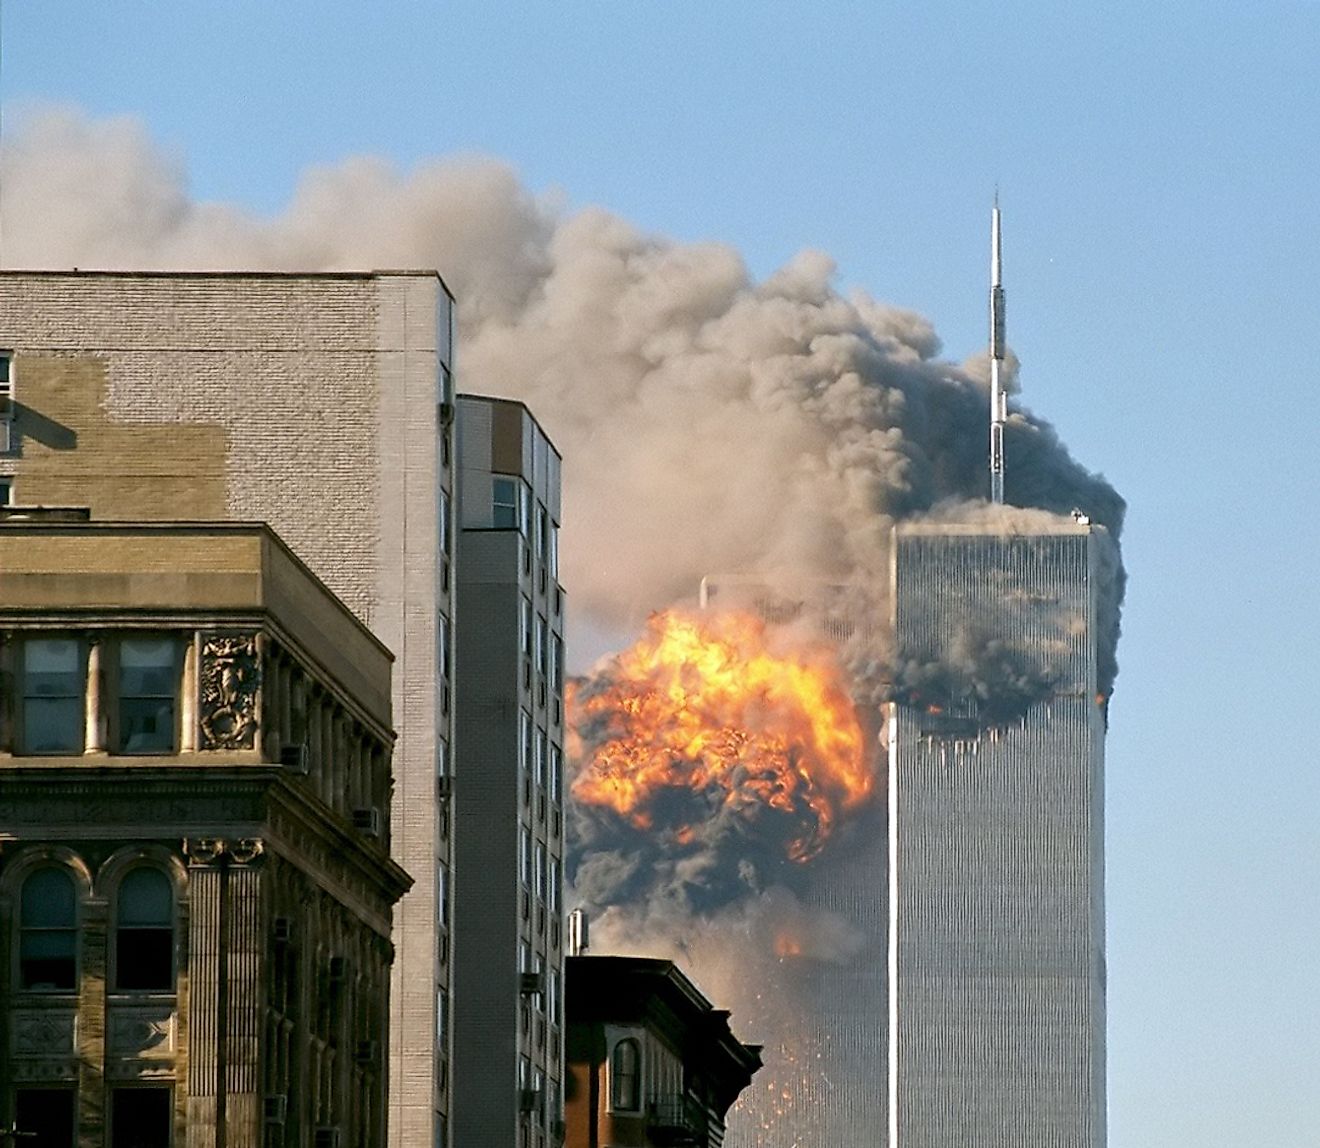  United Airlines Flight 175 crashes into the south tower of the World Trade Center complex in New York City during the September 11 attacks.